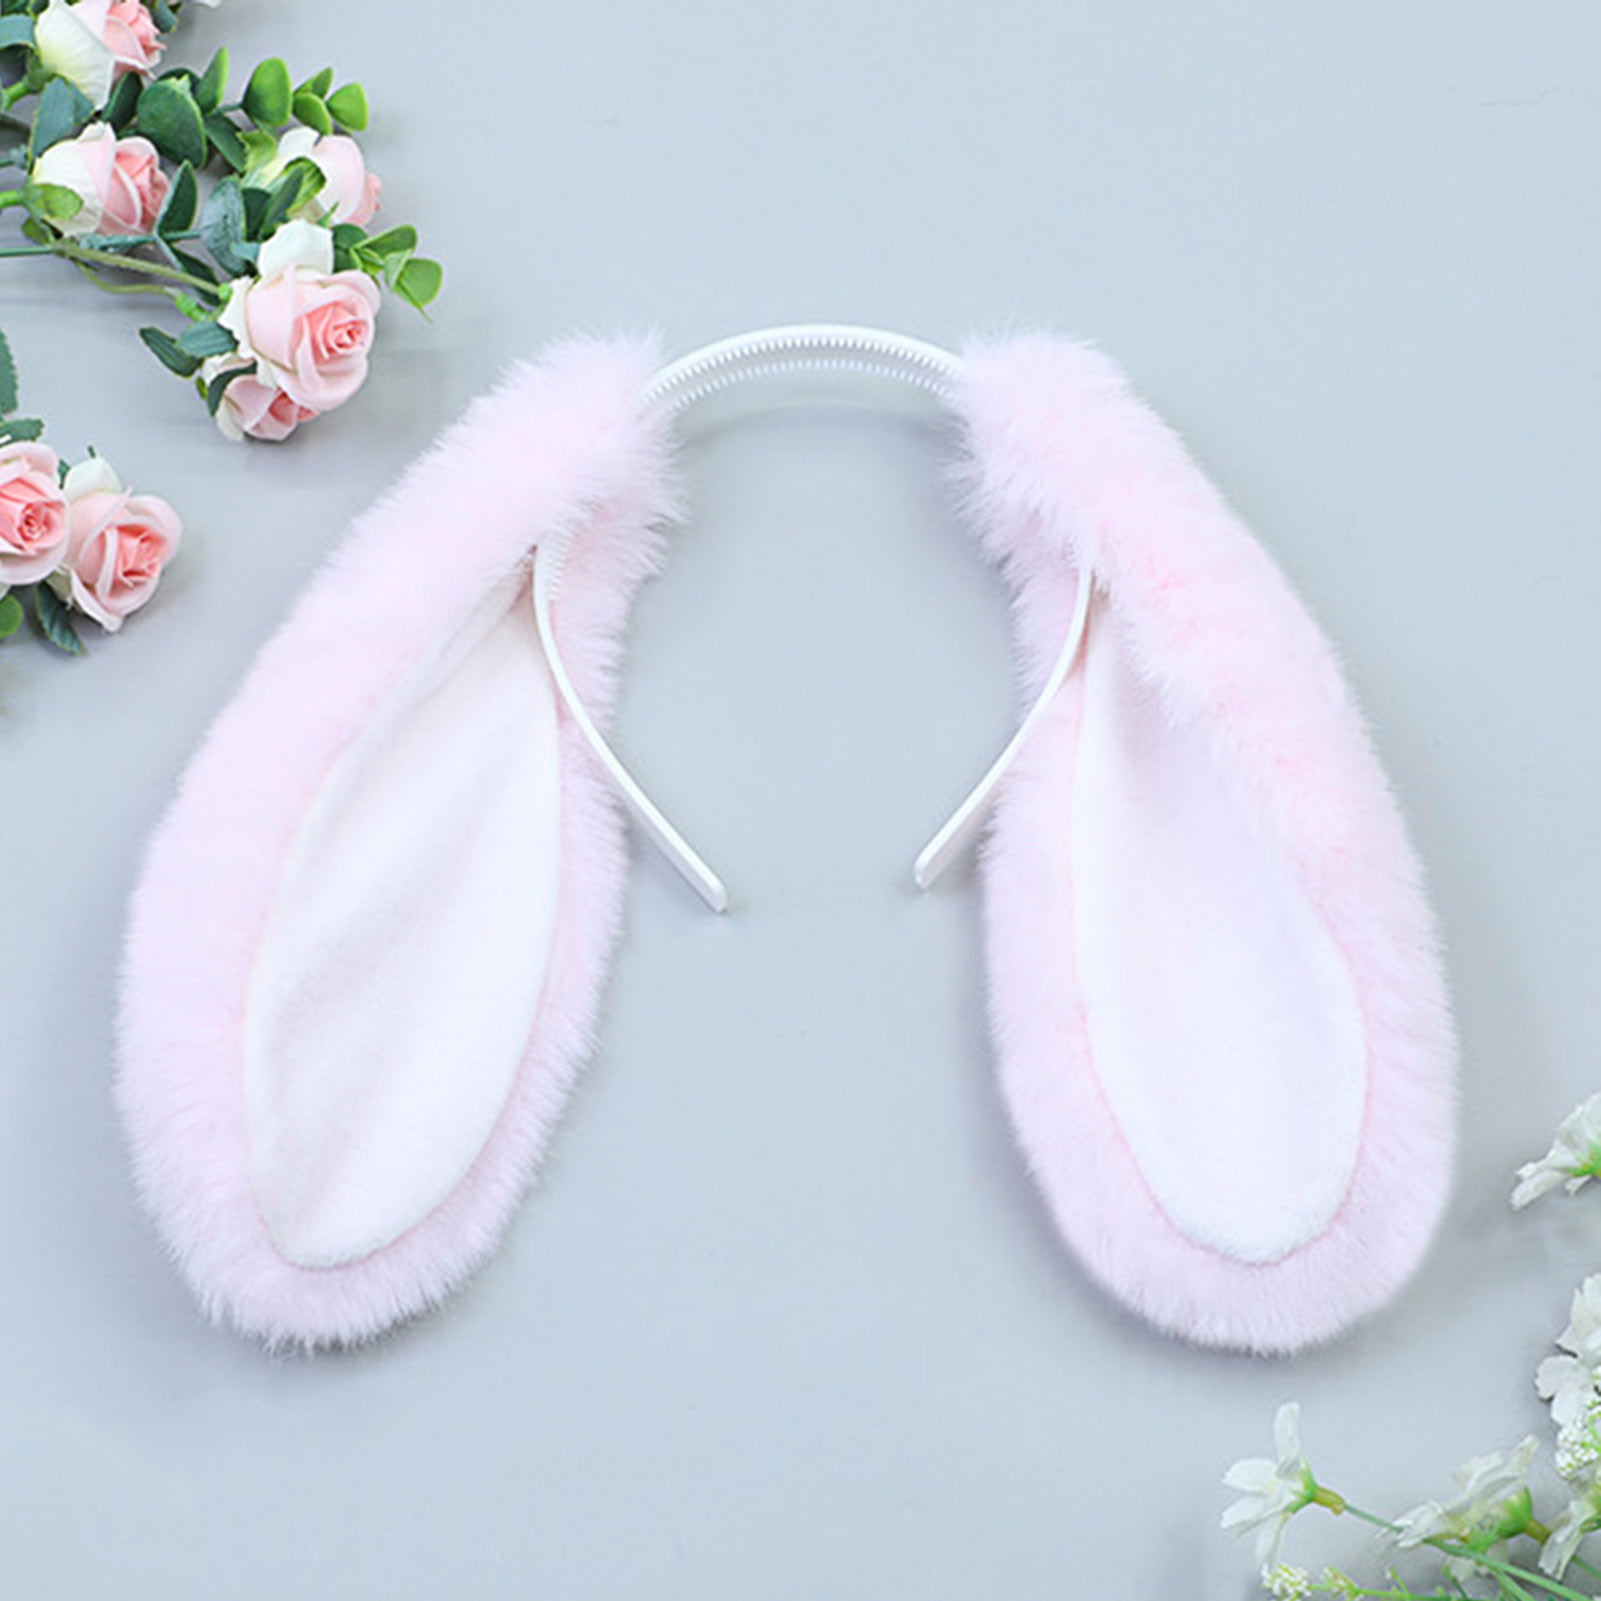 D-GROEE Plush Rabbit Lop Ears Headbands for Party Decorations, Ear Horn ...